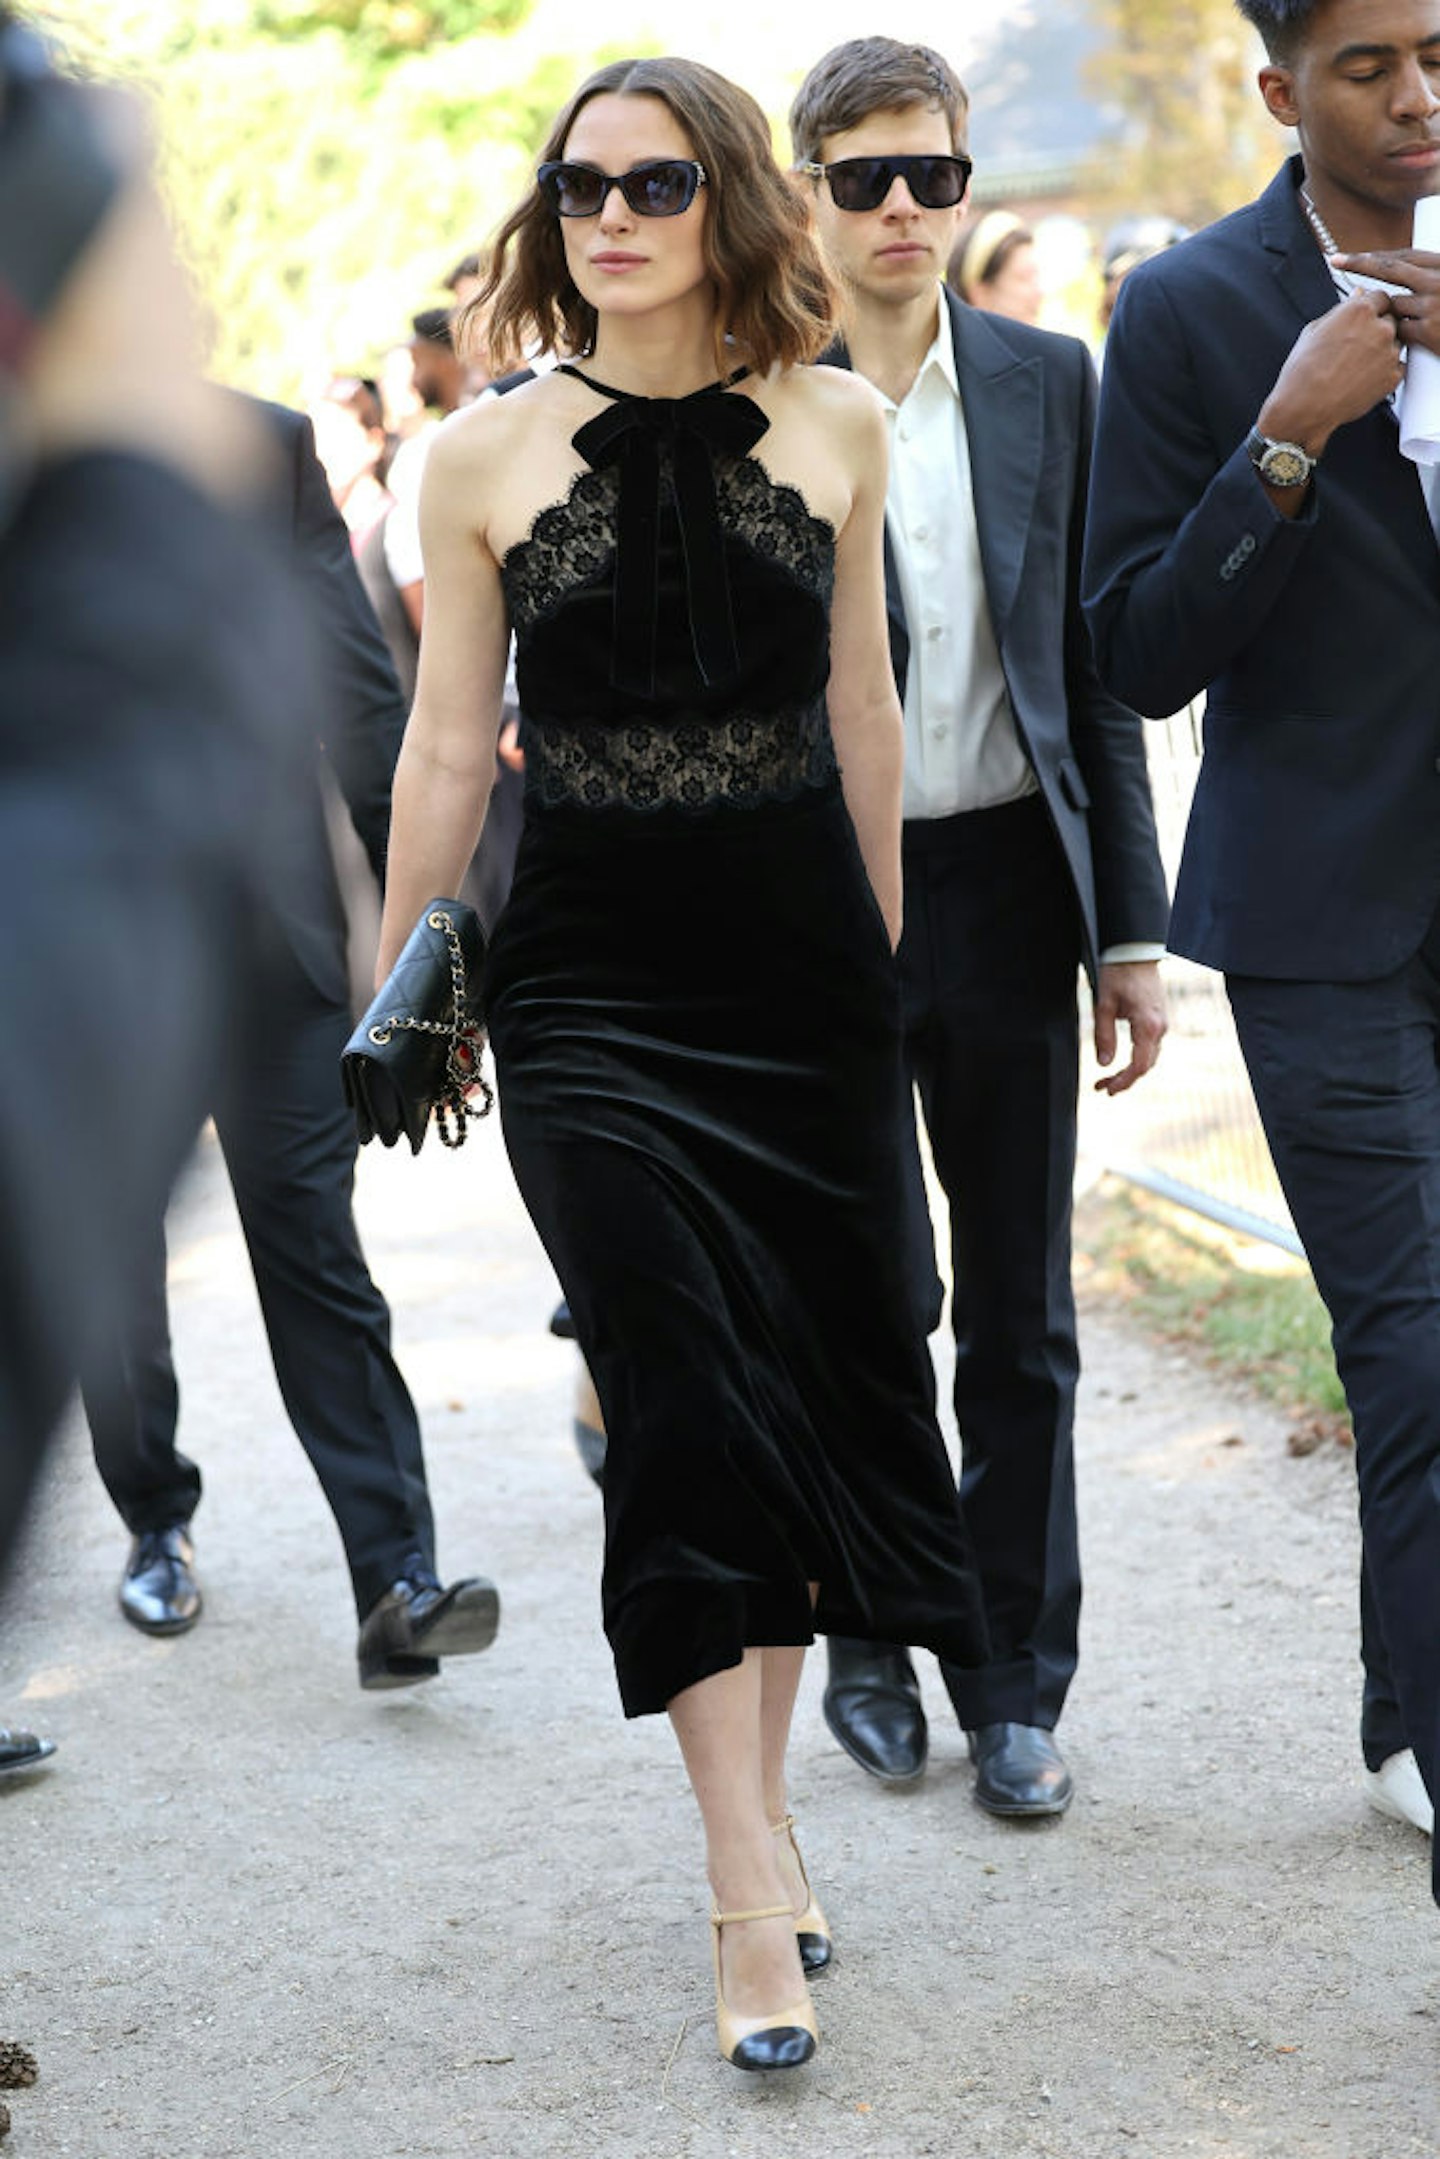 Keira Knightley Boosts LBD with Sunglasses & Pumps for Chanel